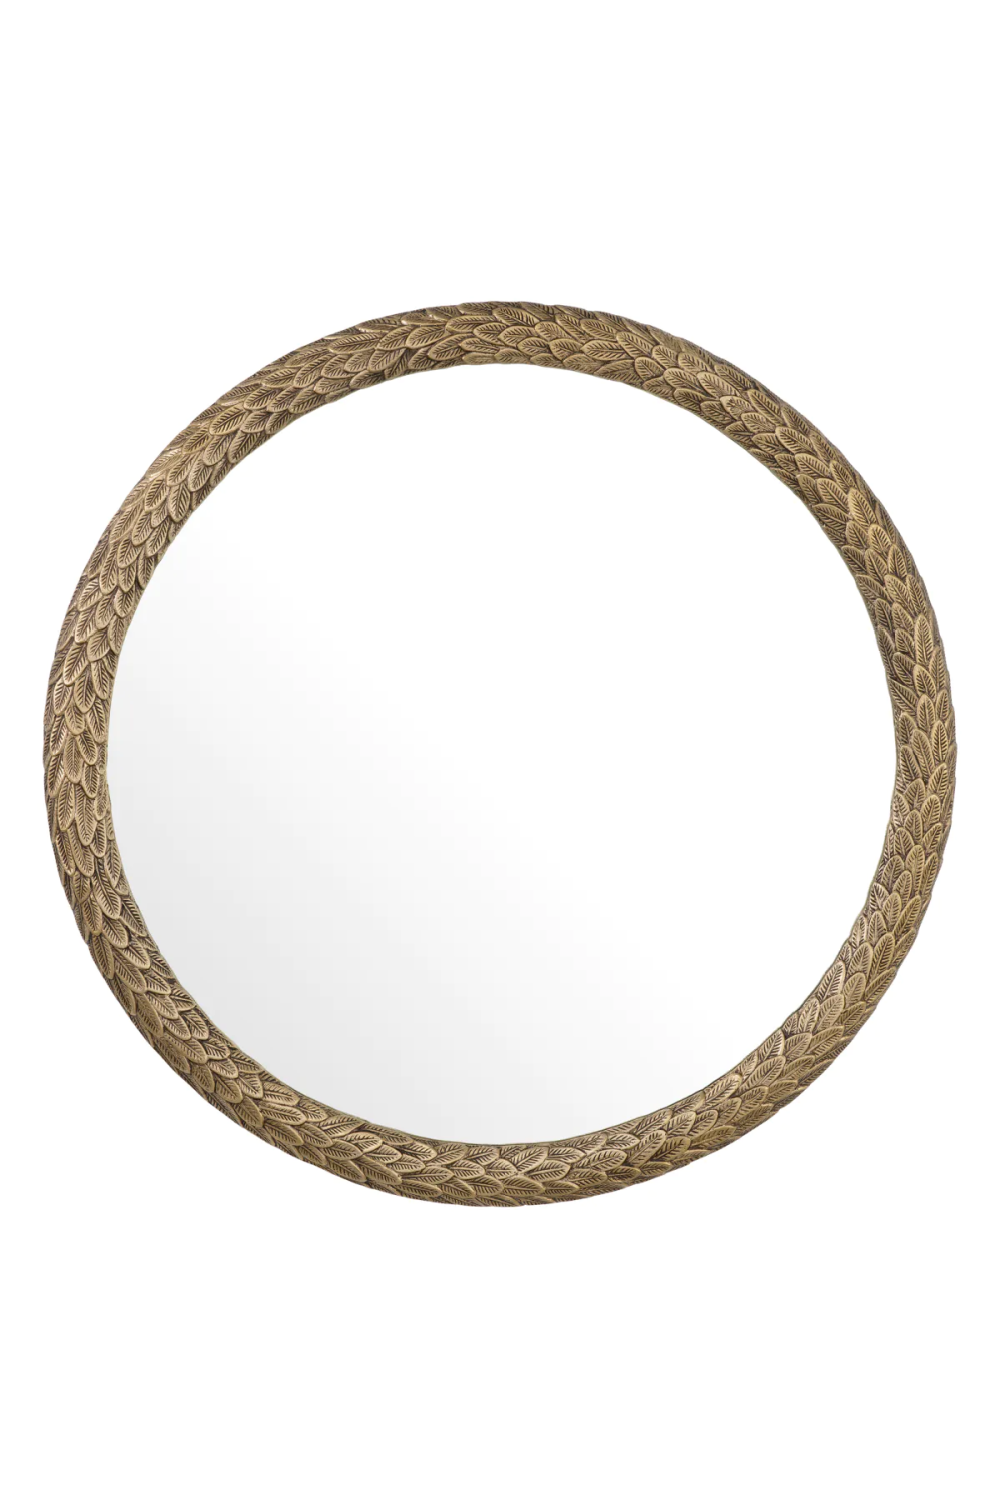 Leaves Patterned Oval Mirror | Eichholtz Soave | Oroa.com